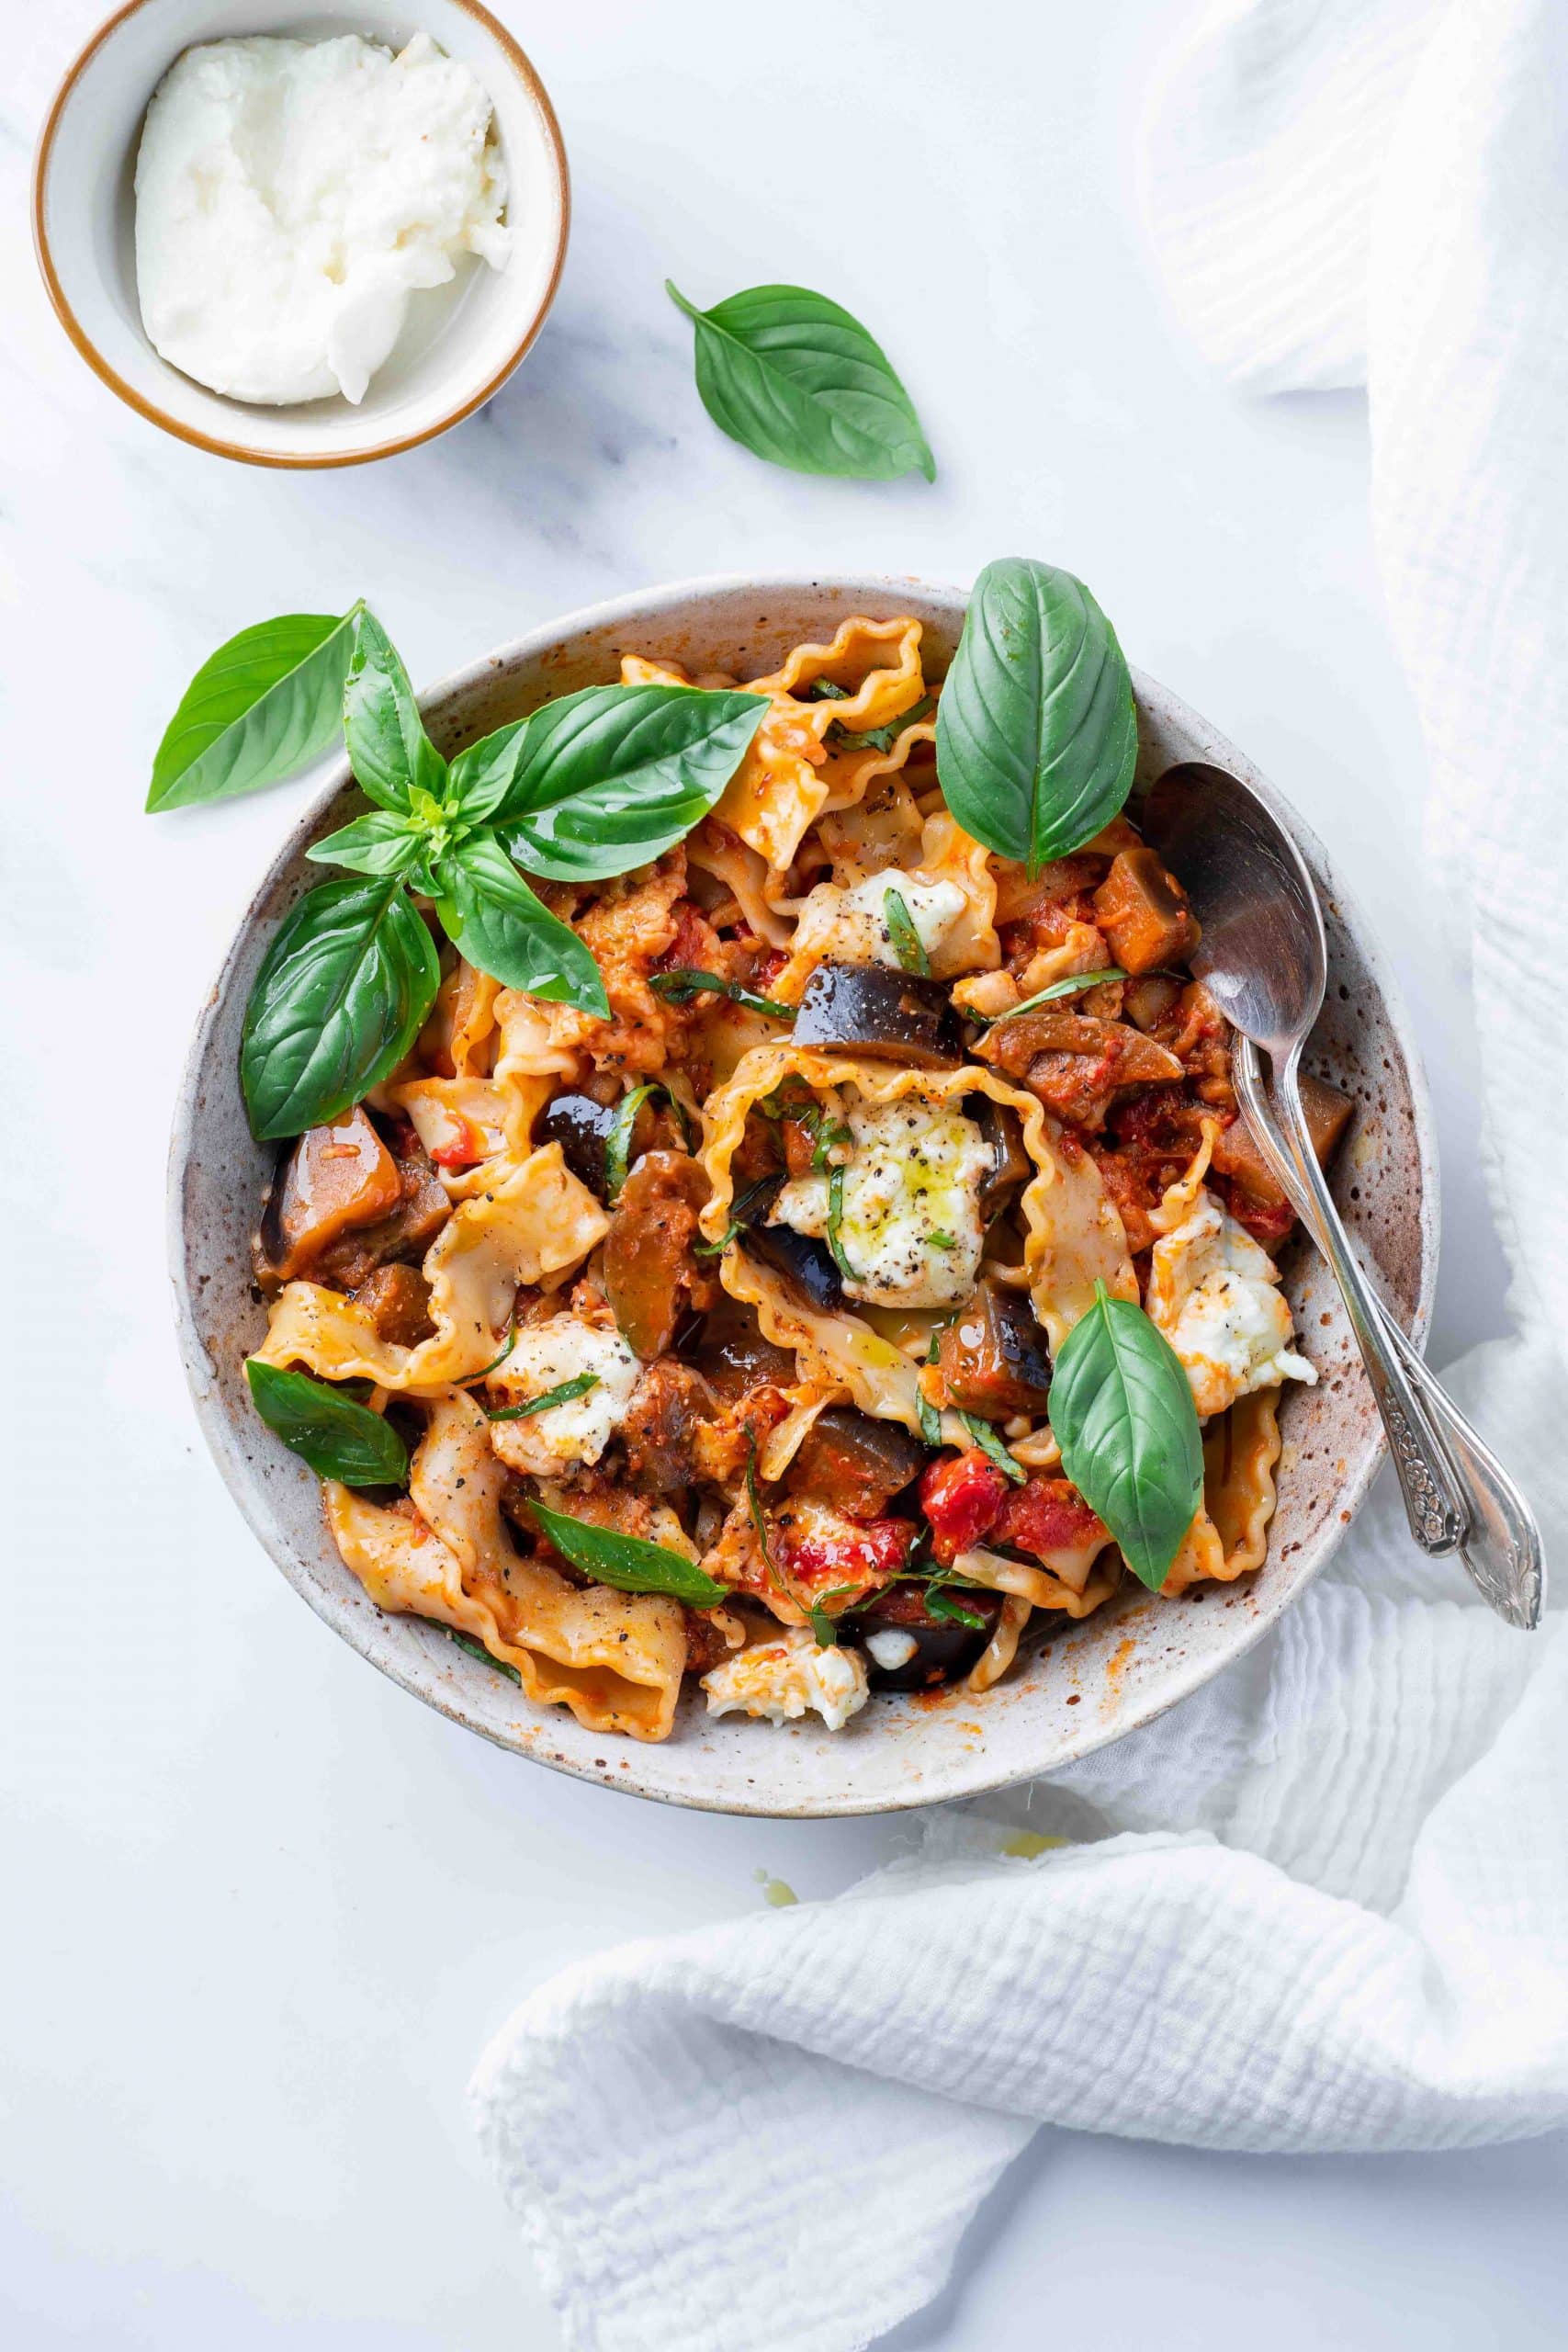 Top view of a bowl of eggplant and mozzarella pasta decorated with basil leaves